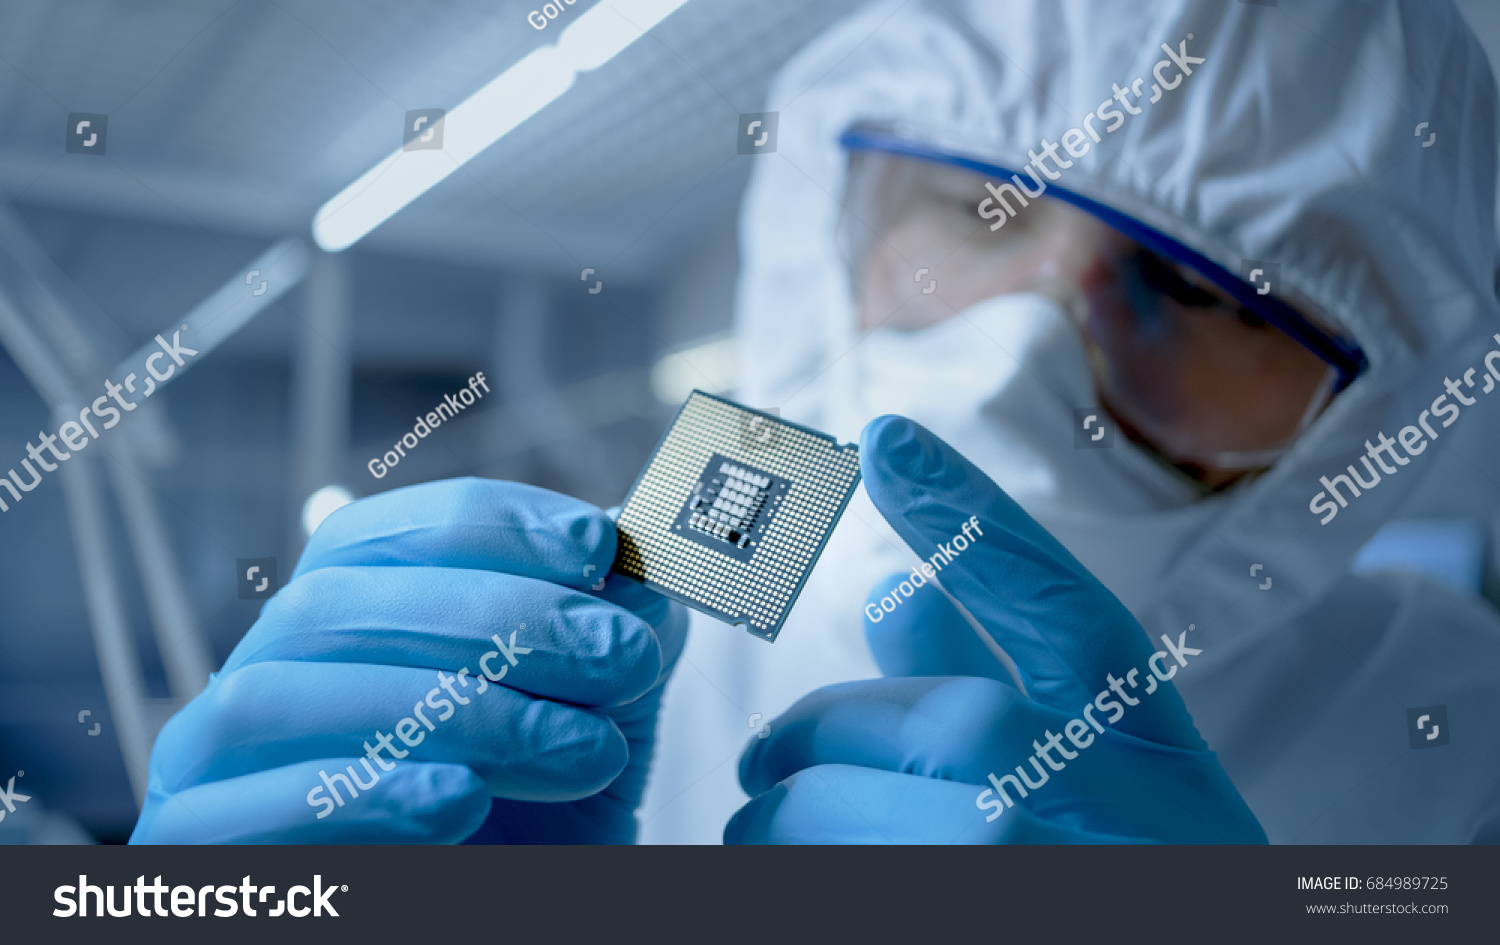 In Ultra Modern Electronic Manufacturing Factory Design Engineer in Sterile Coverall Holds Microchip with Gloves and Examines it. #684989725